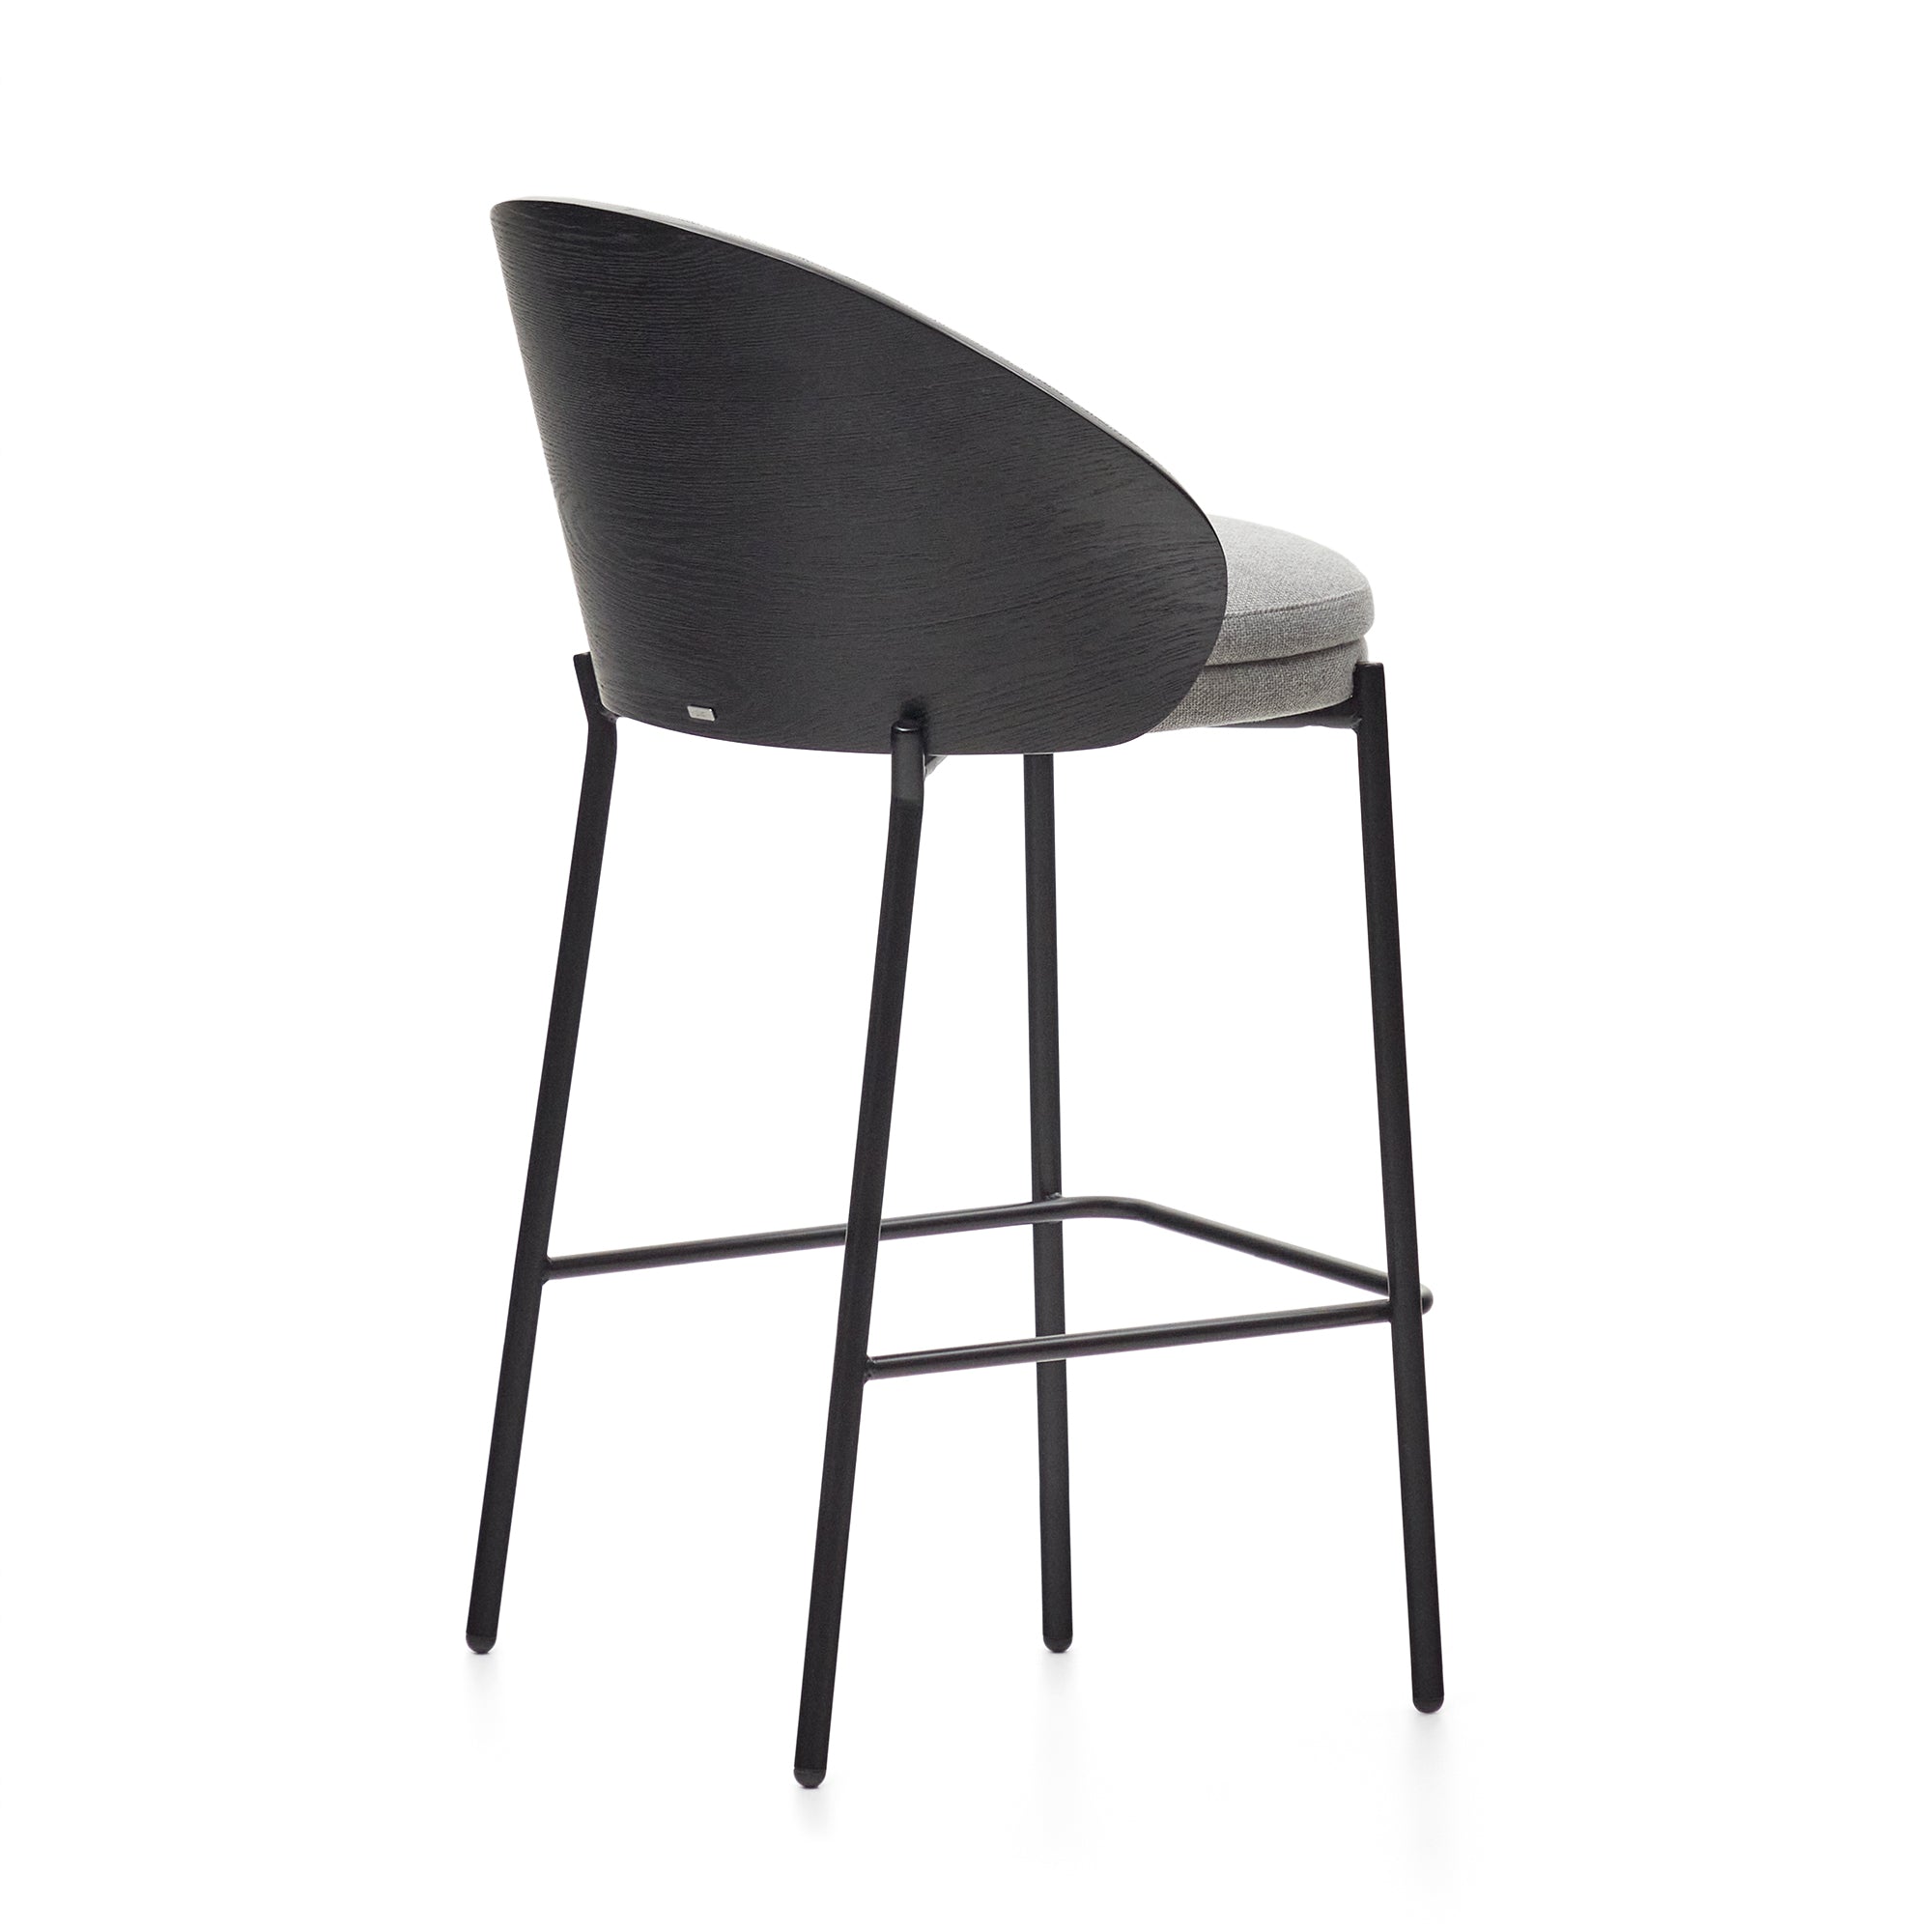 Eamy light grey stool in an ash wood veneer with a black finish and black metal, 65 cm